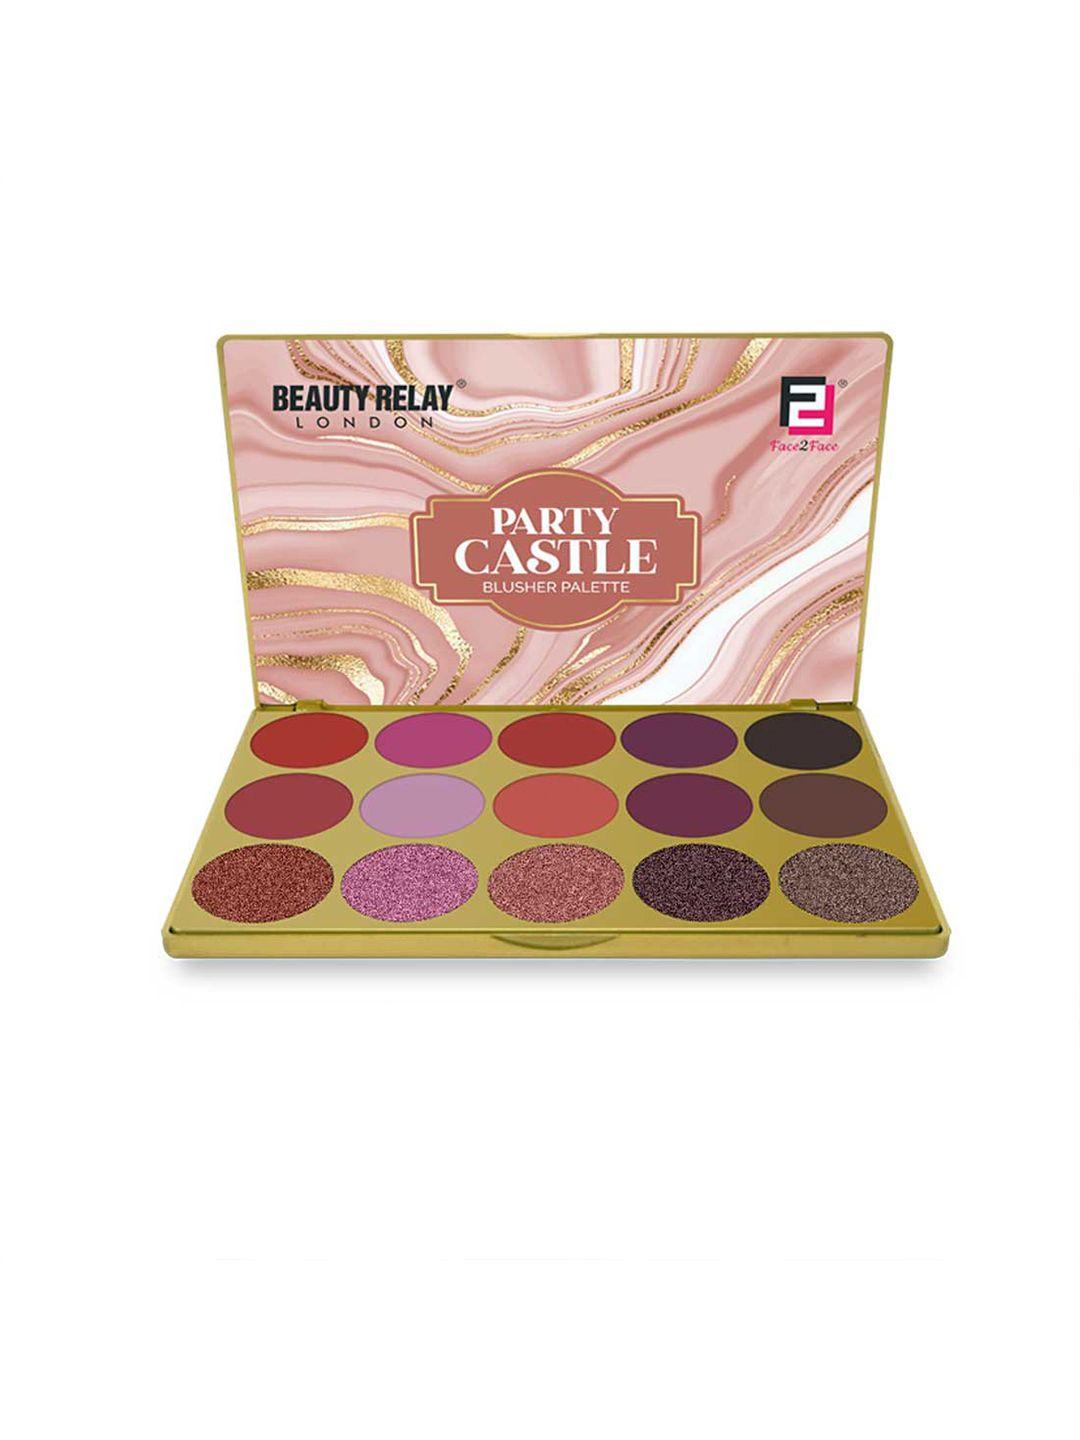 beautyrelay london face 2 face party castle blusher palette with 15 shades 52gm